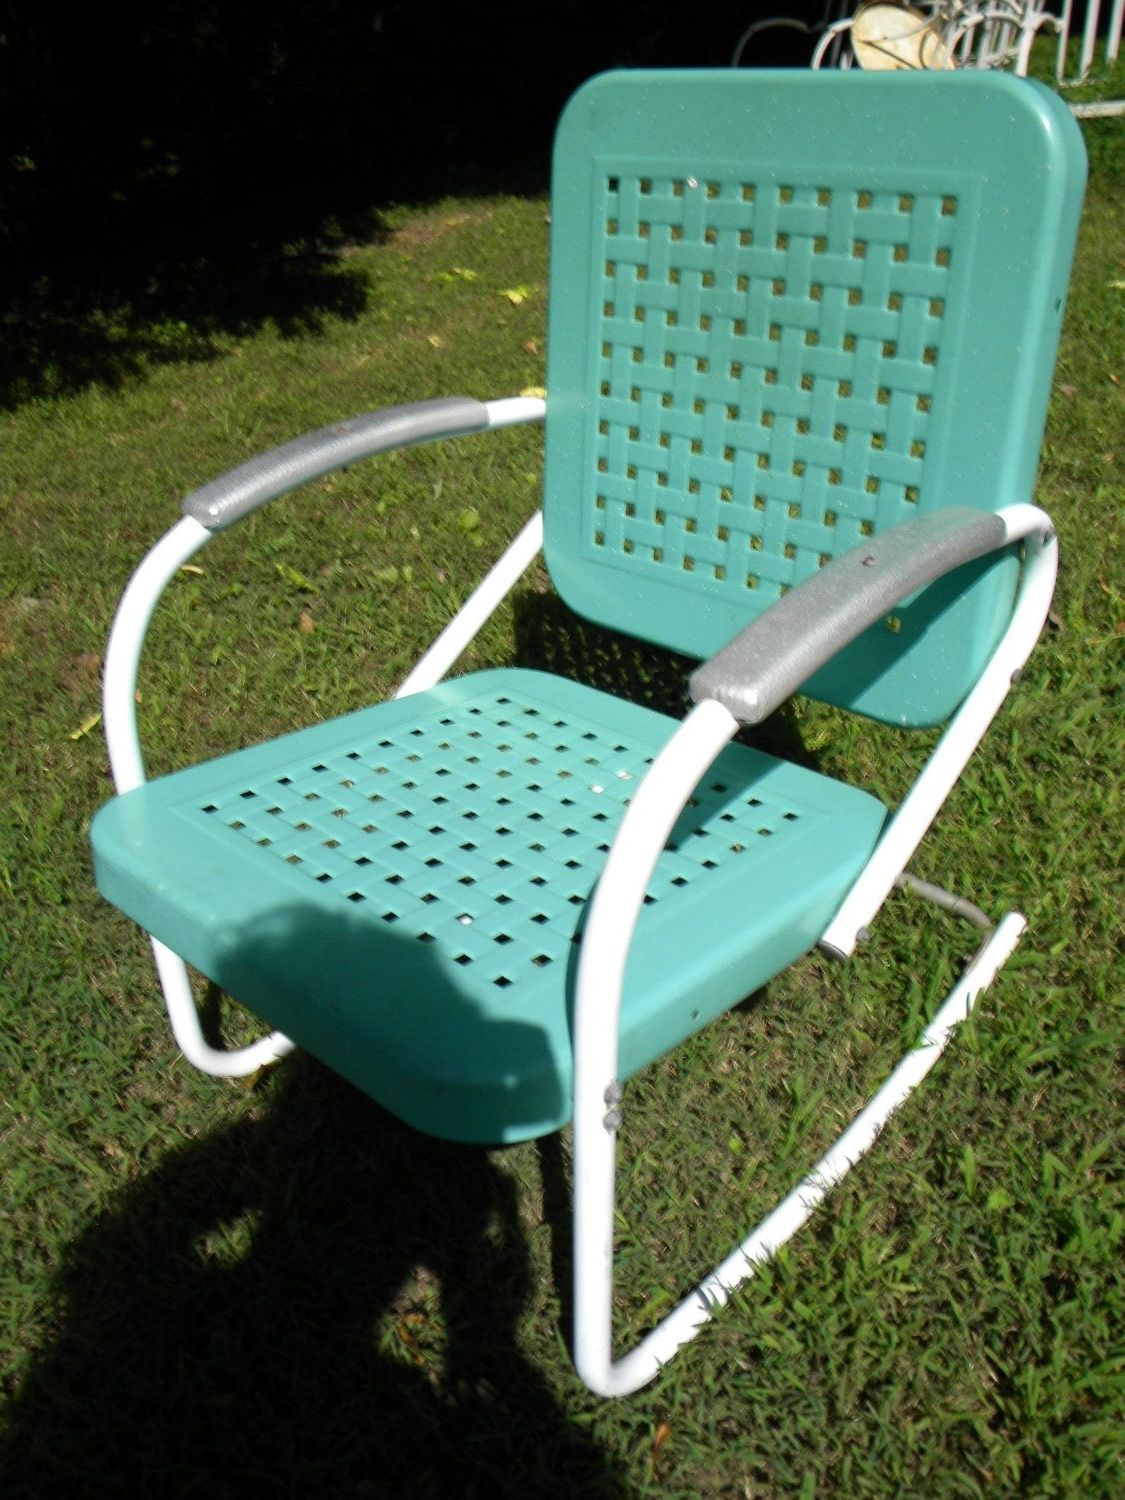 Latest Reserve For Sandy Vtg 50s 60s Retro Outdoor Metal Lawn Patio Porch Regarding Vintage Metal Rocking Patio Chairs (View 2 of 15)